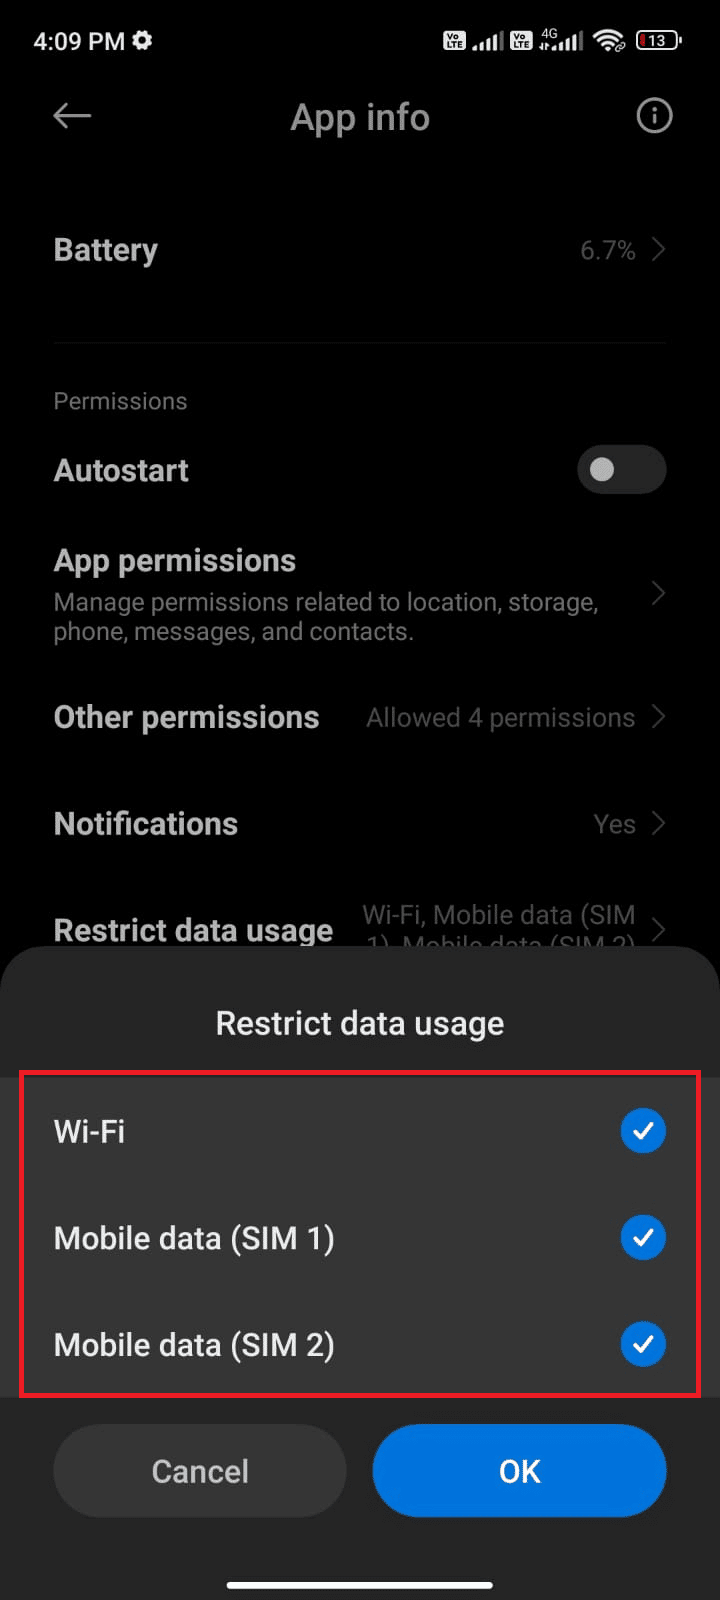 Now, make sure you have selected Wi-Fi and Mobile data and Mobile data if applicable. Then tap OK